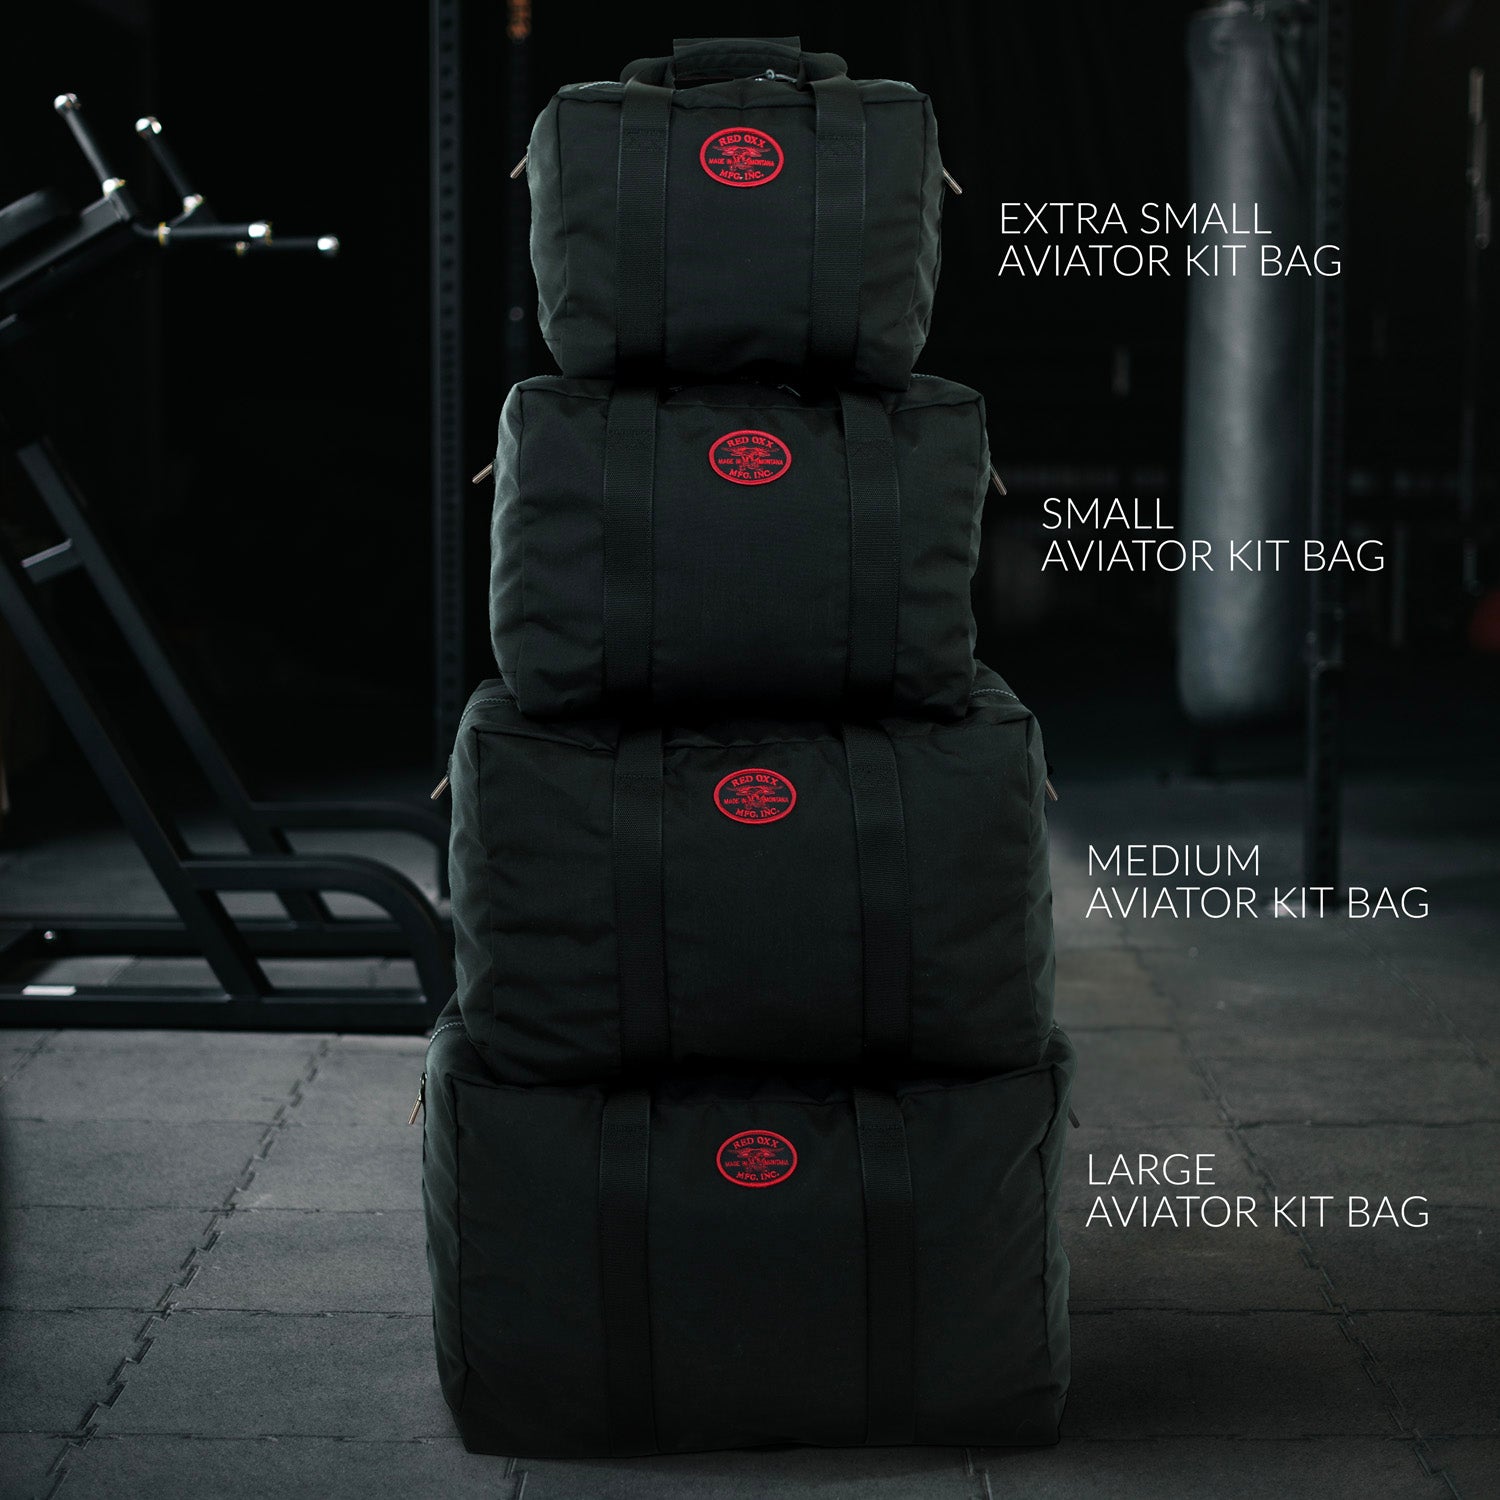 Comparison of all four Red Oxx aviator kit bags. from the top  Extra Small - Small-Medium and Large. 